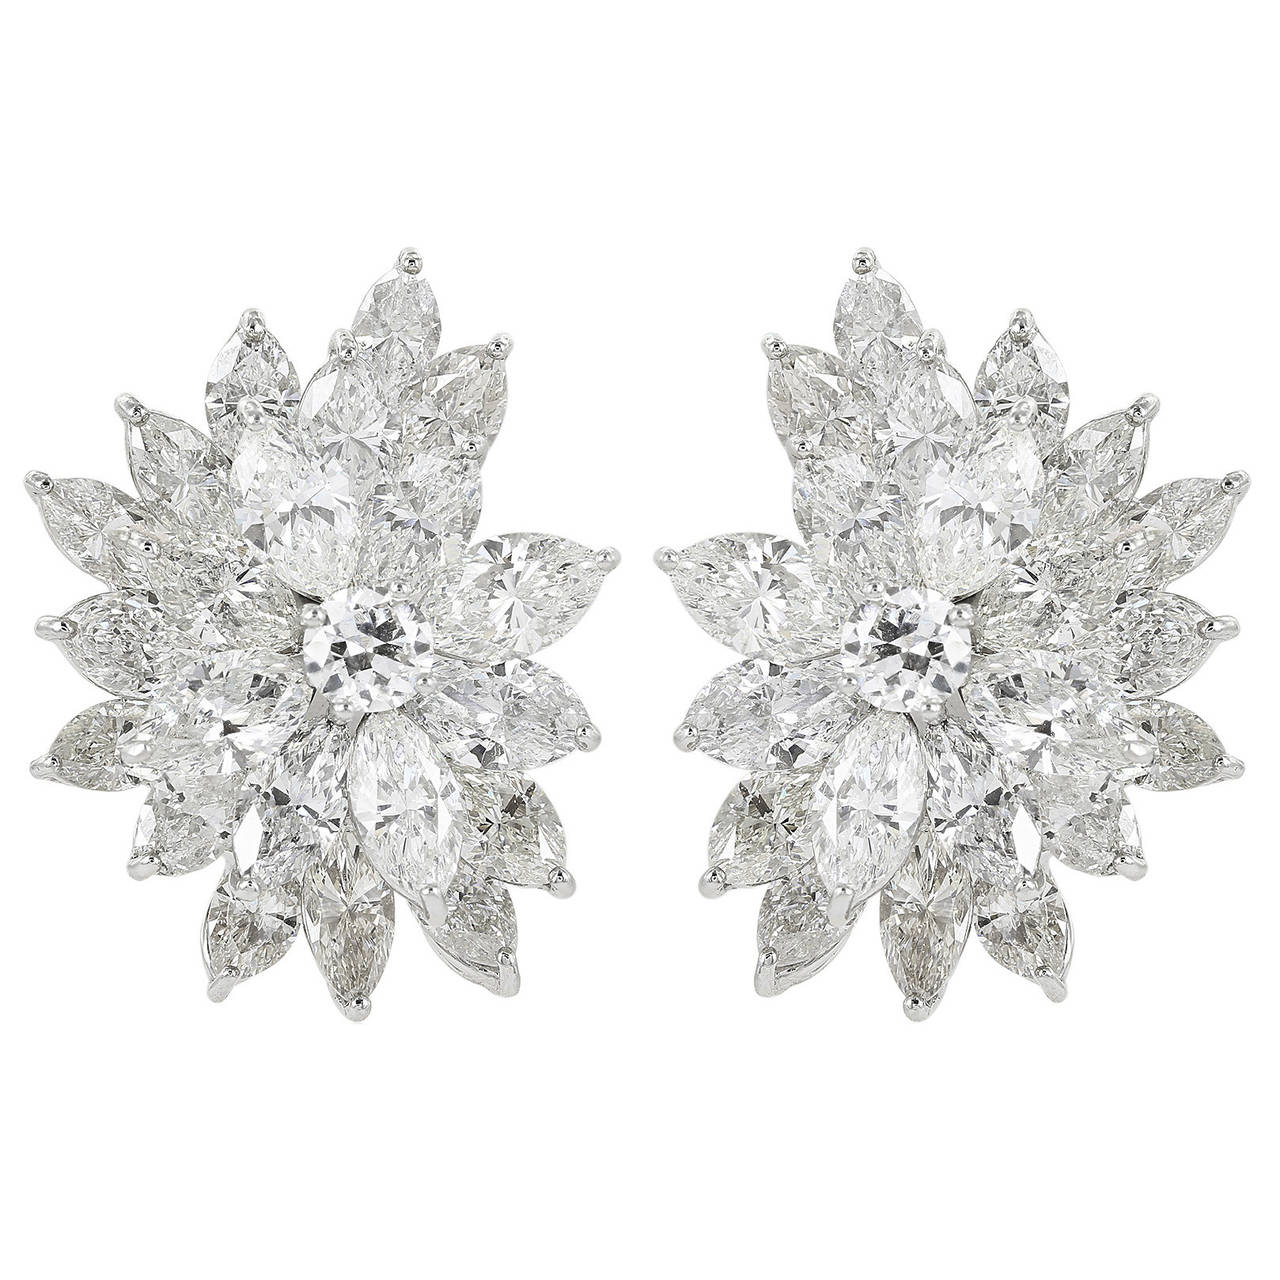 15 Carat Diamonds and Platinum Spray Earrings For Sale at 1stDibs